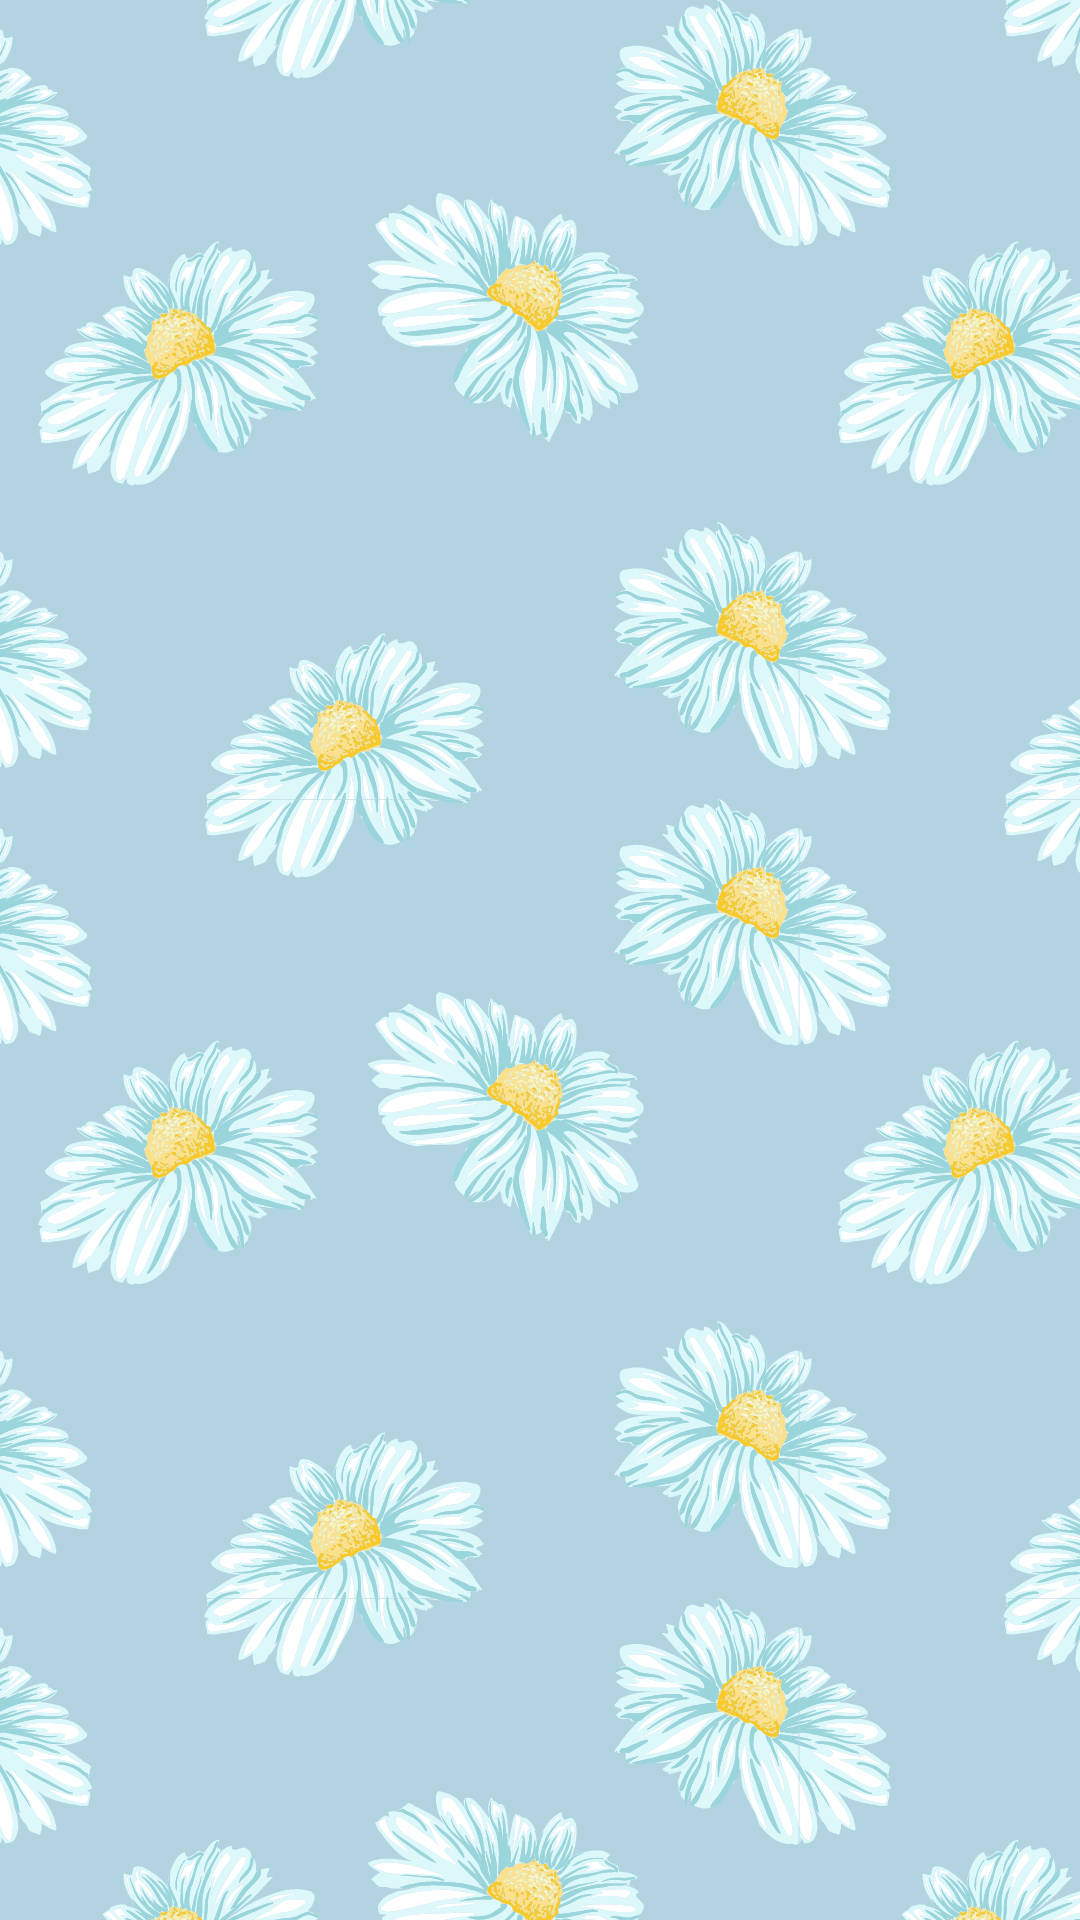 Pretty Aesthetic Daisies Background